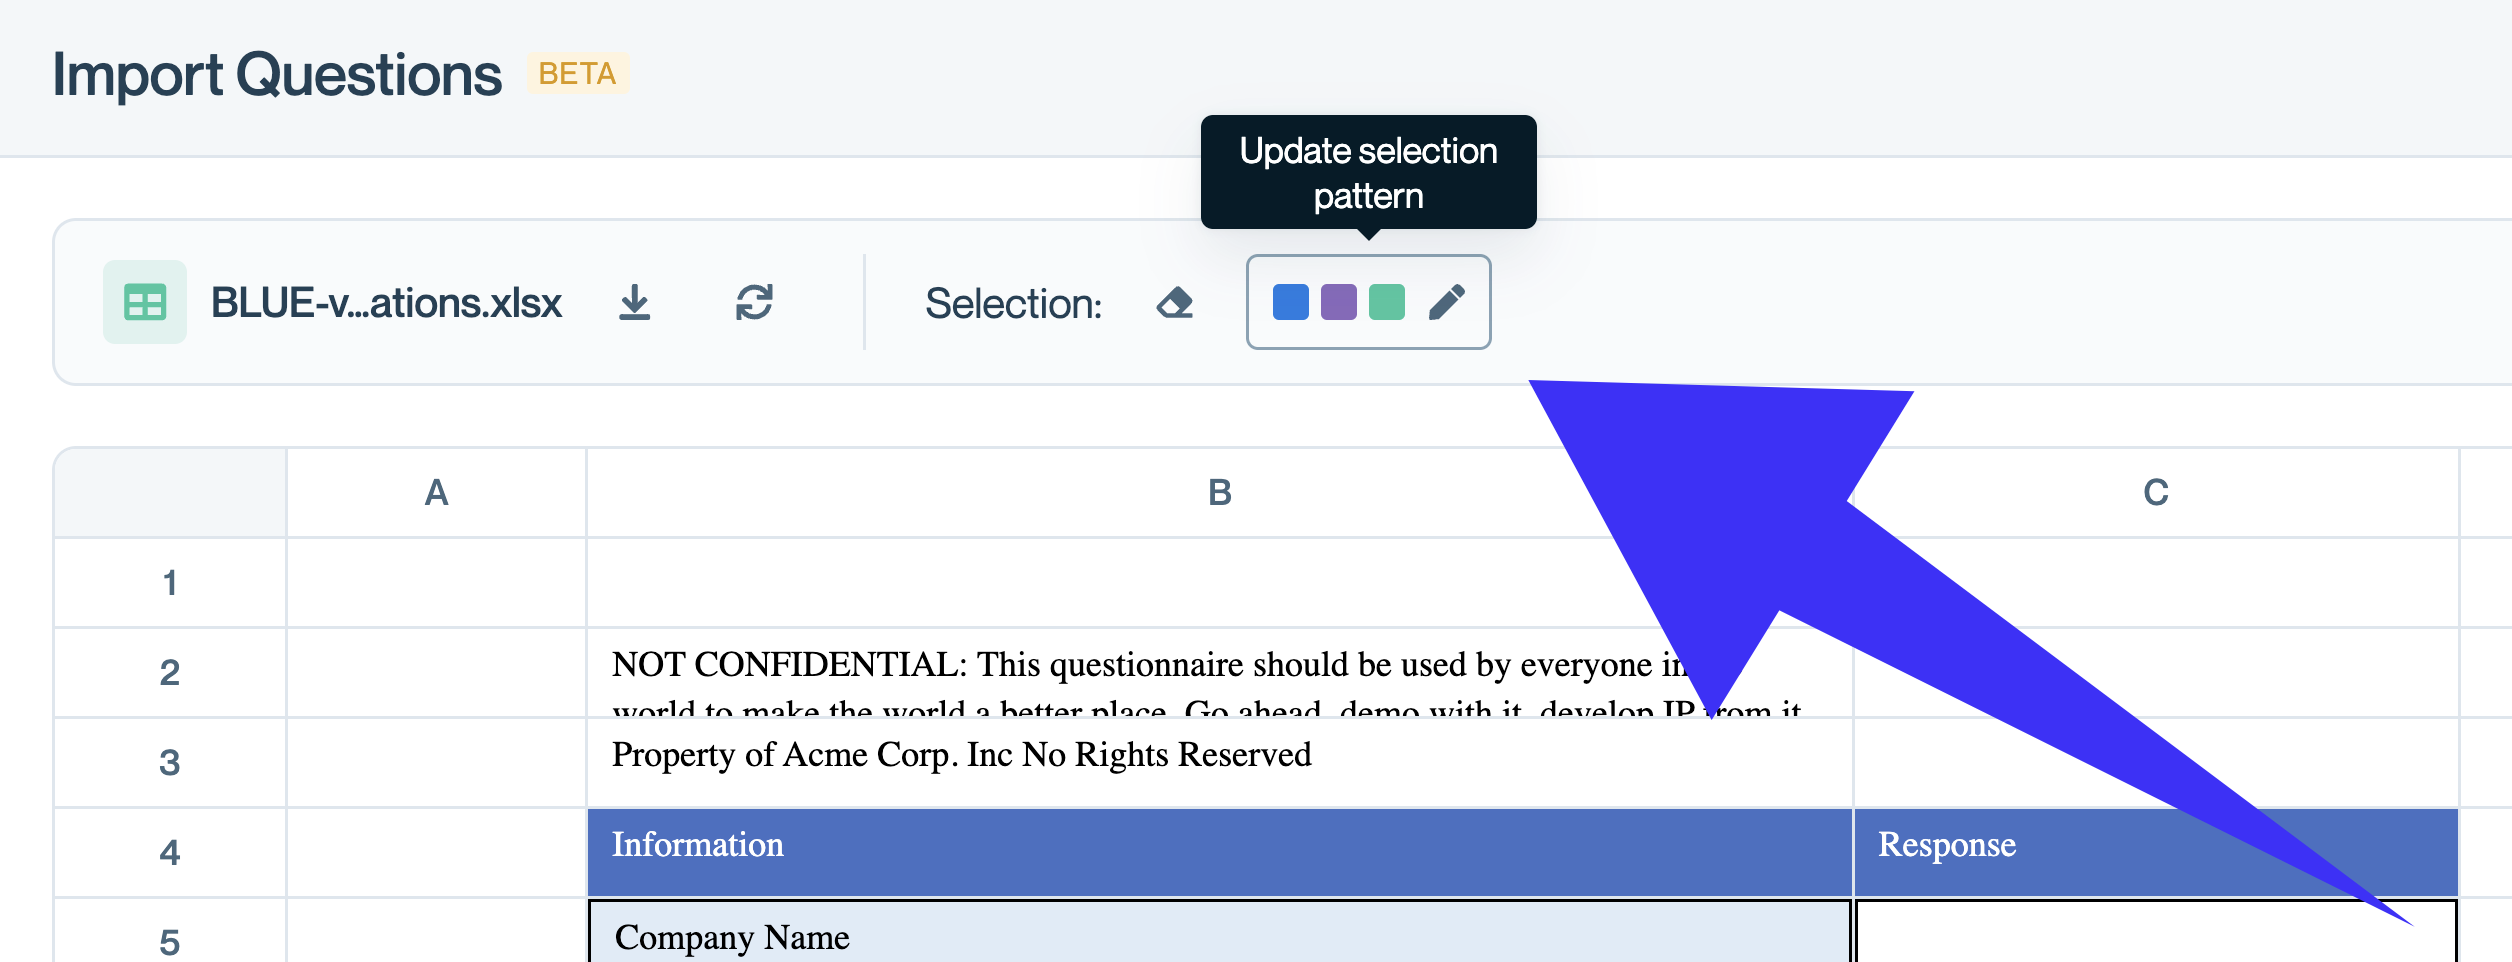 Click "Update selection pattern" to define a new pattern of questions, answers, and optional comments